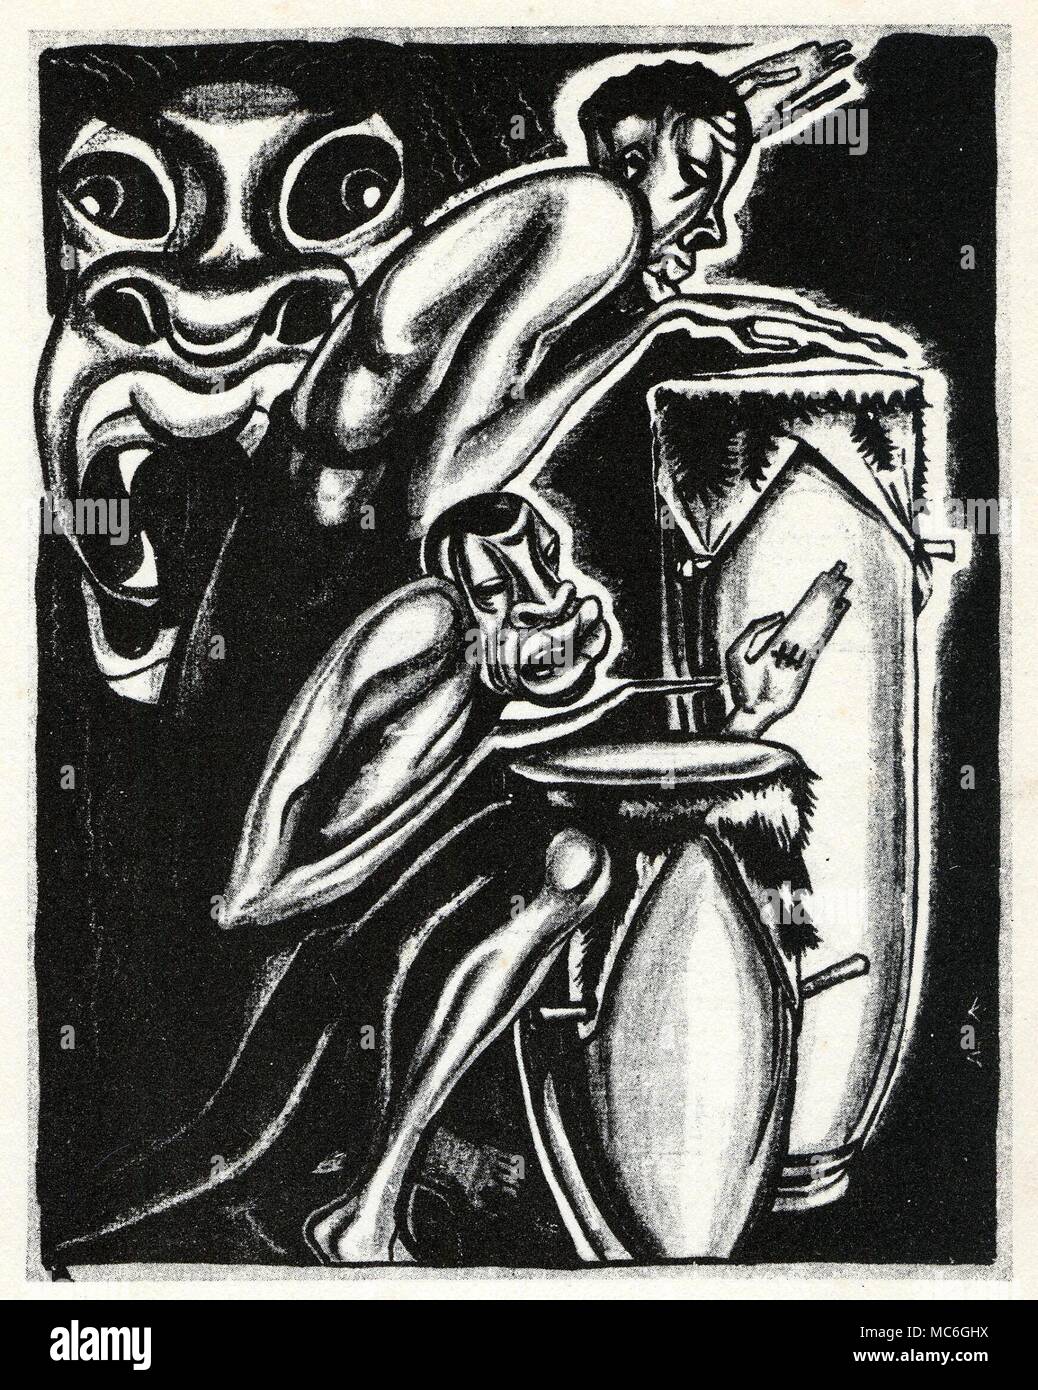 VOODOO - RADA DRUMS Rada drums being played during the preparation for a Voodoo ritual before the altar in the houmfort, or mystery house. Illustration by A. King, for W.B. Seabrook, The Magic Island, 1929. Stock Photo